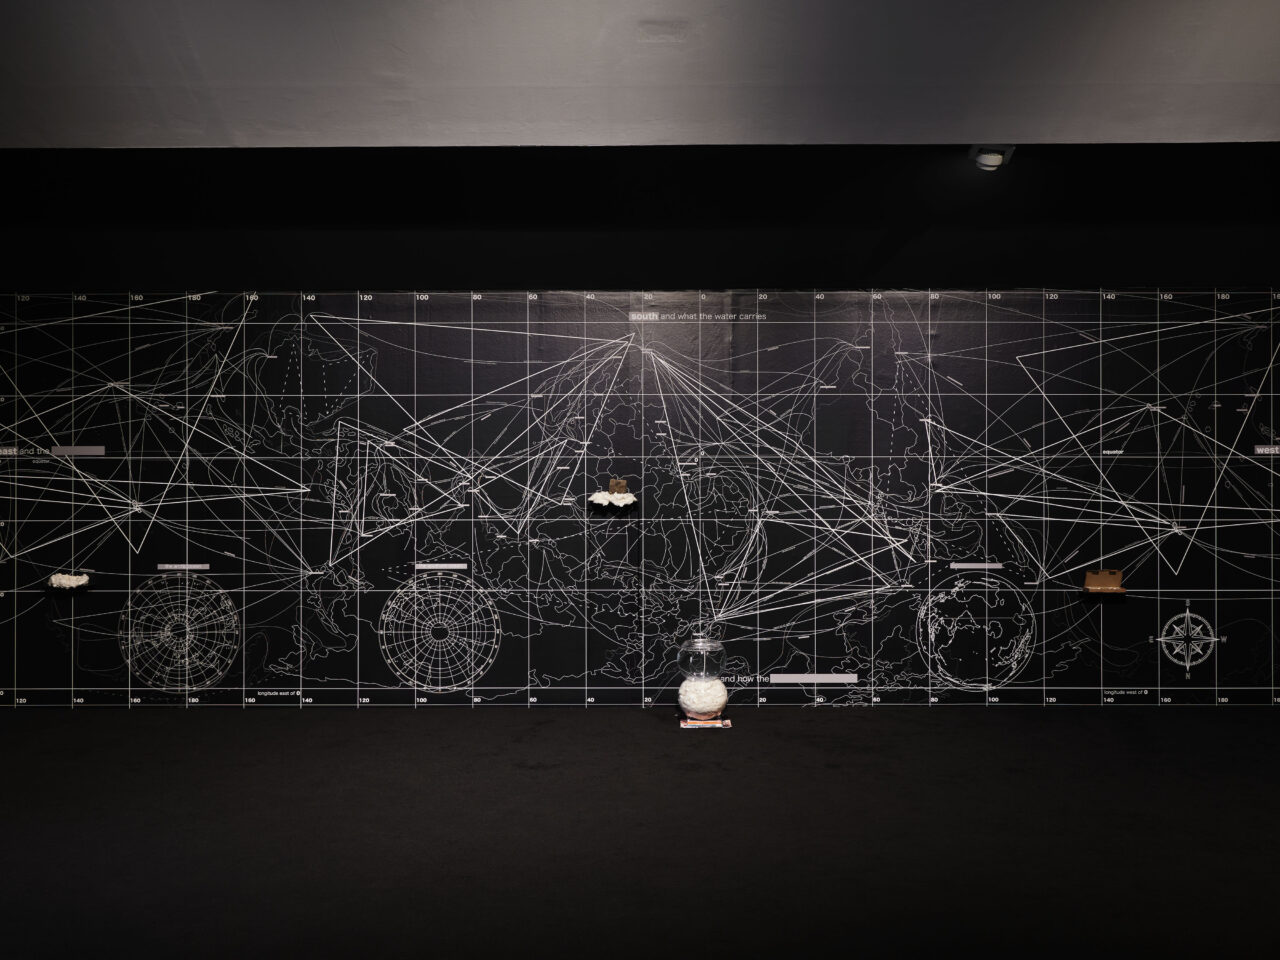 An installation with a large vinyl sticker covering the entire wall. The vinyl is black with white mapping and graphs covering it. There are shelves with various objects on them within the wall.